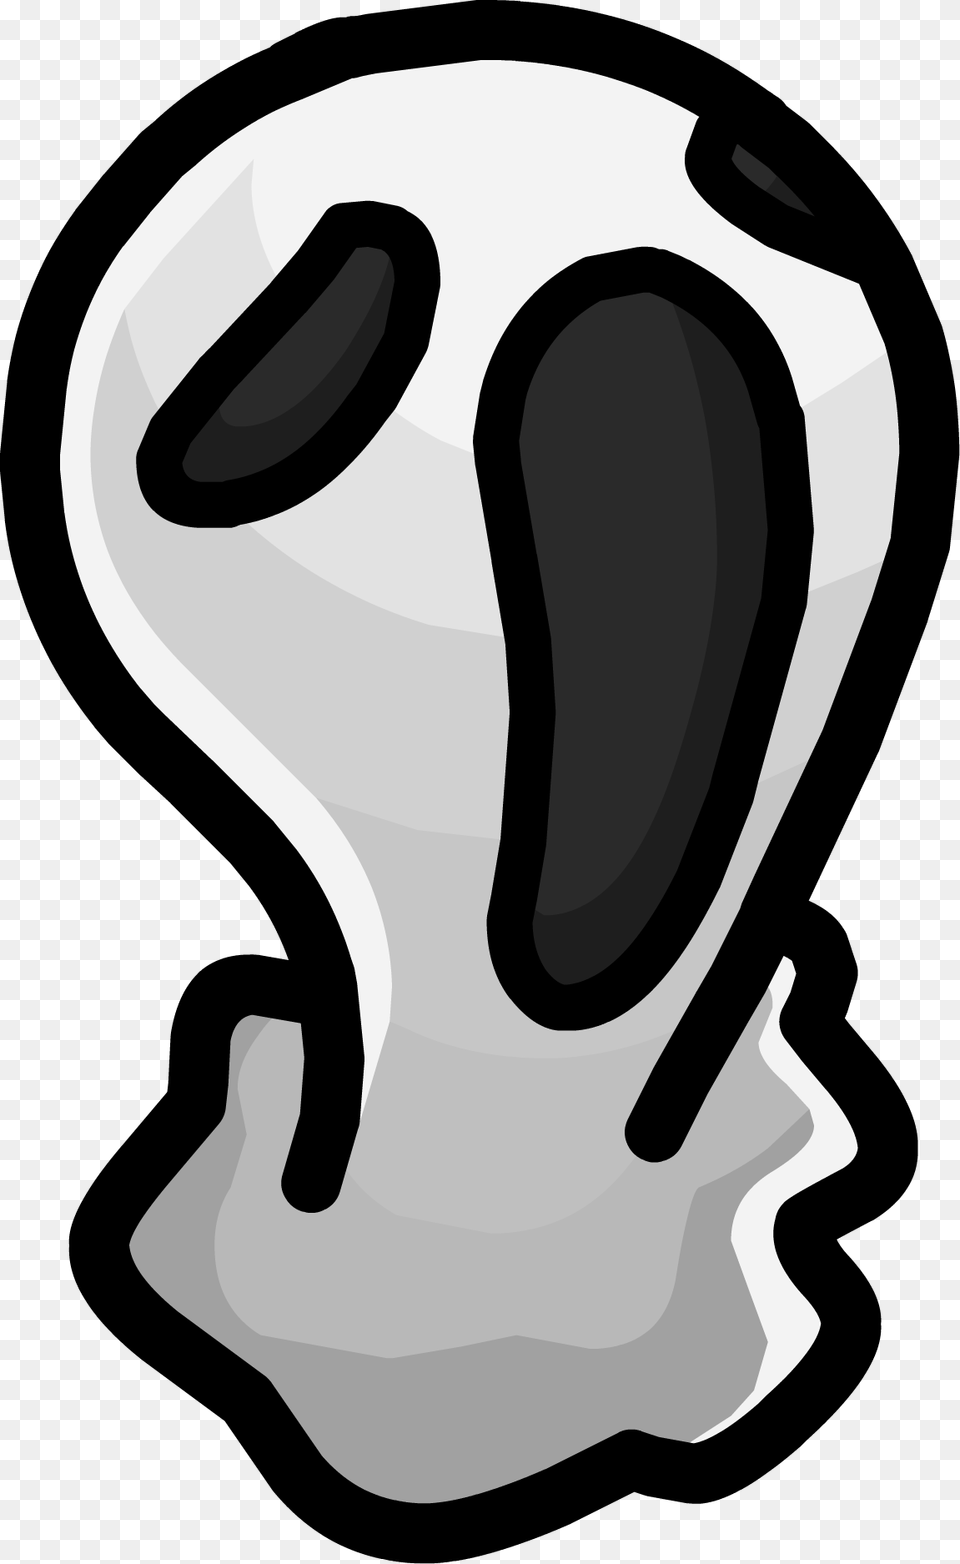 Minighost 2113 Scary Scarypng, Stencil, Smoke Pipe Png